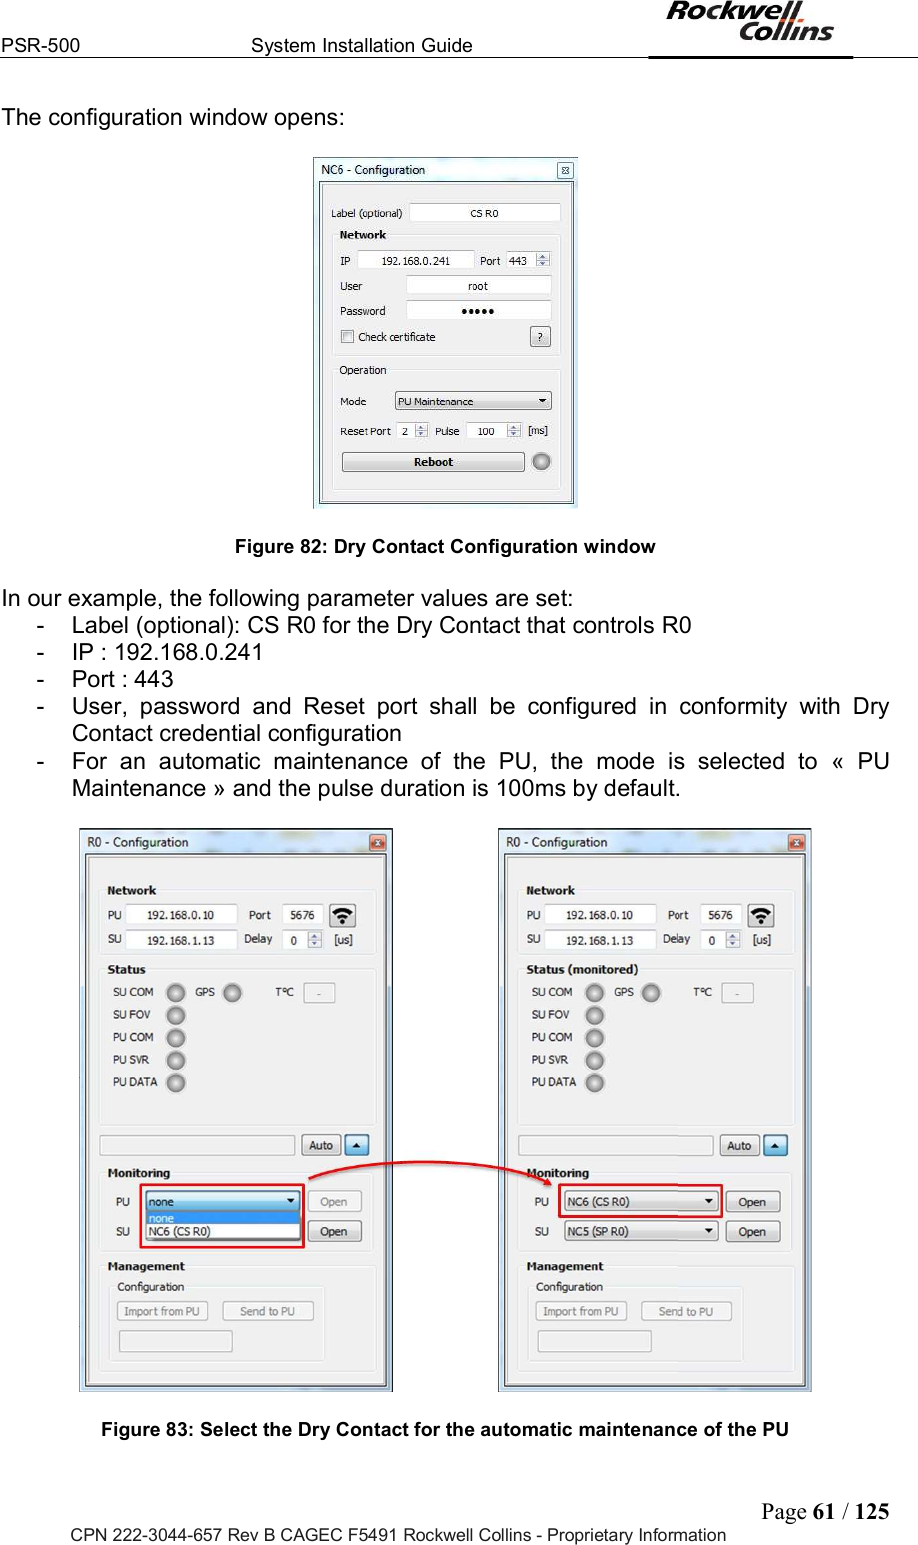 PSR-500  System Installation Guide  Page 61 / 125 CPN 222-3044-657 Rev B CAGEC F5491 Rockwell Collins - Proprietary Information The configuration window opens:    Figure 82: Dry Contact Configuration window  In our example, the following parameter values are set:  -  Label (optional): CS R0 for the Dry Contact that controls R0 -  IP : 192.168.0.241 -  Port : 443 -  User,  password  and  Reset  port  shall  be  configured  in  conformity  with  Dry Contact credential configuration -  For  an  automatic  maintenance  of  the  PU,  the  mode  is  selected  to  «  PU Maintenance » and the pulse duration is 100ms by default.    Figure 83: Select the Dry Contact for the automatic maintenance of the PU  